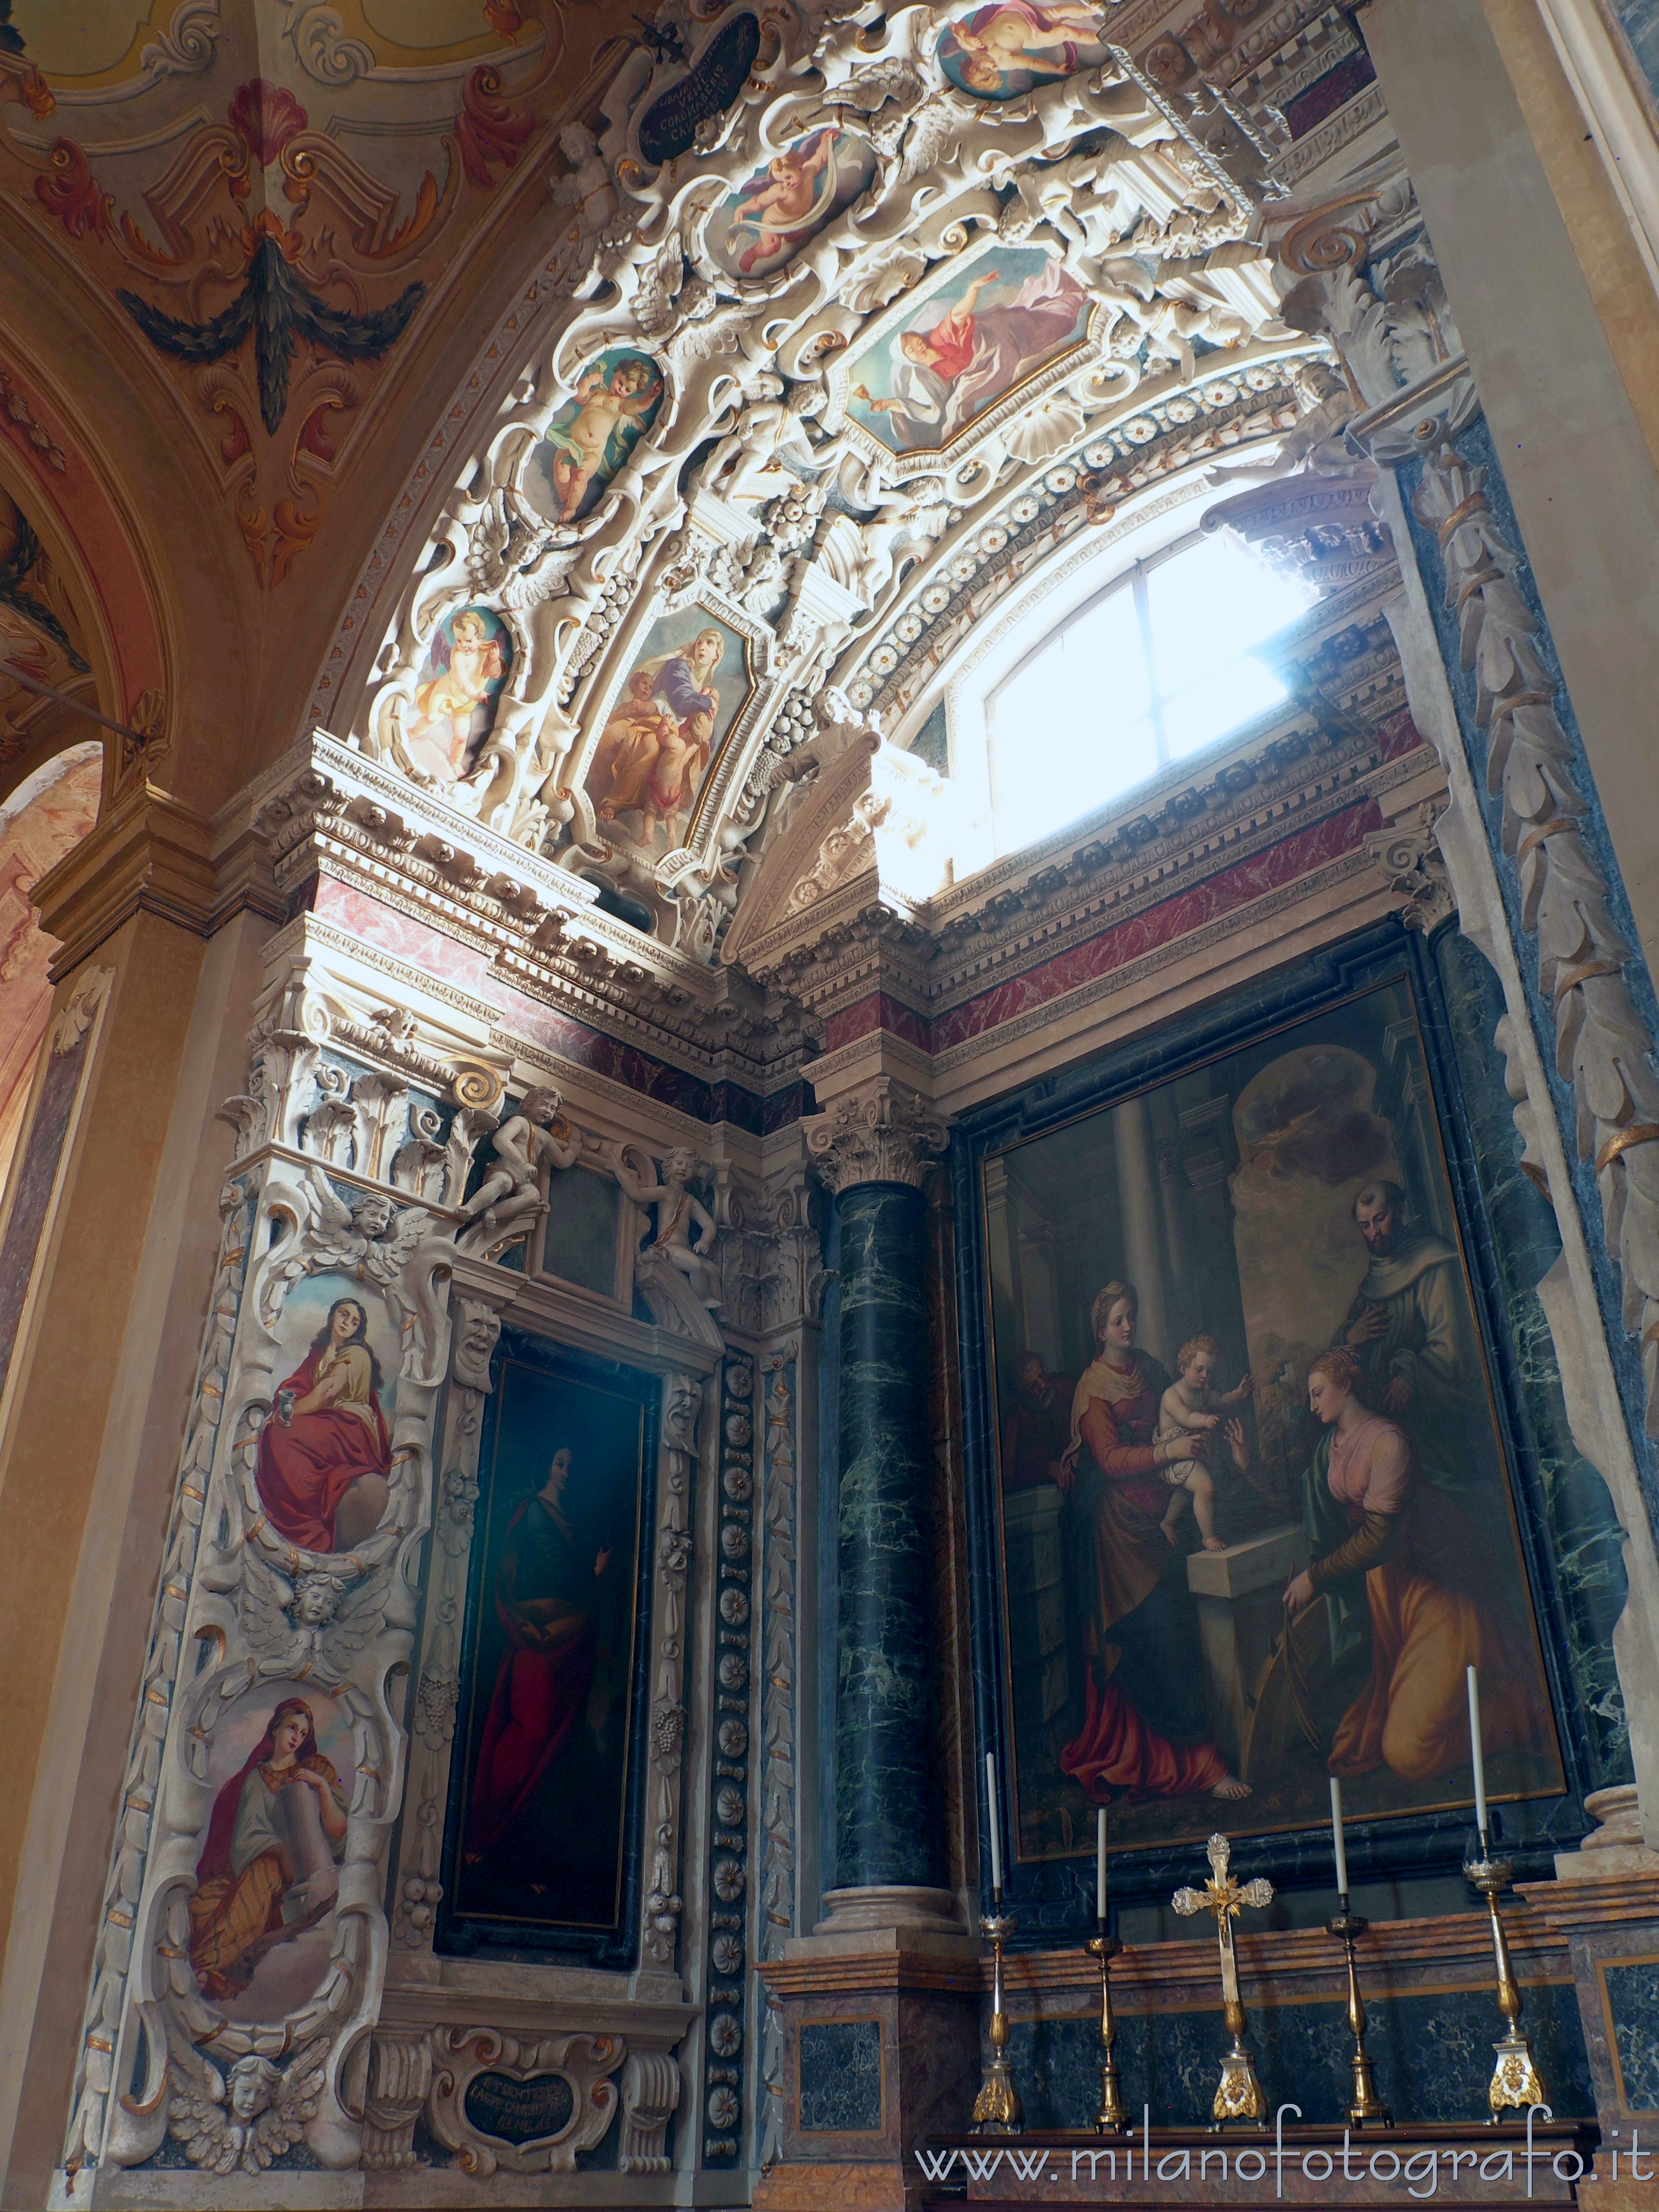 Vimercate (Monza e Brianza, Italy): Chapel of Santa Caterina in the the Sanctuary of the Blessed Virgin of the Rosary - Vimercate (Monza e Brianza, Italy)